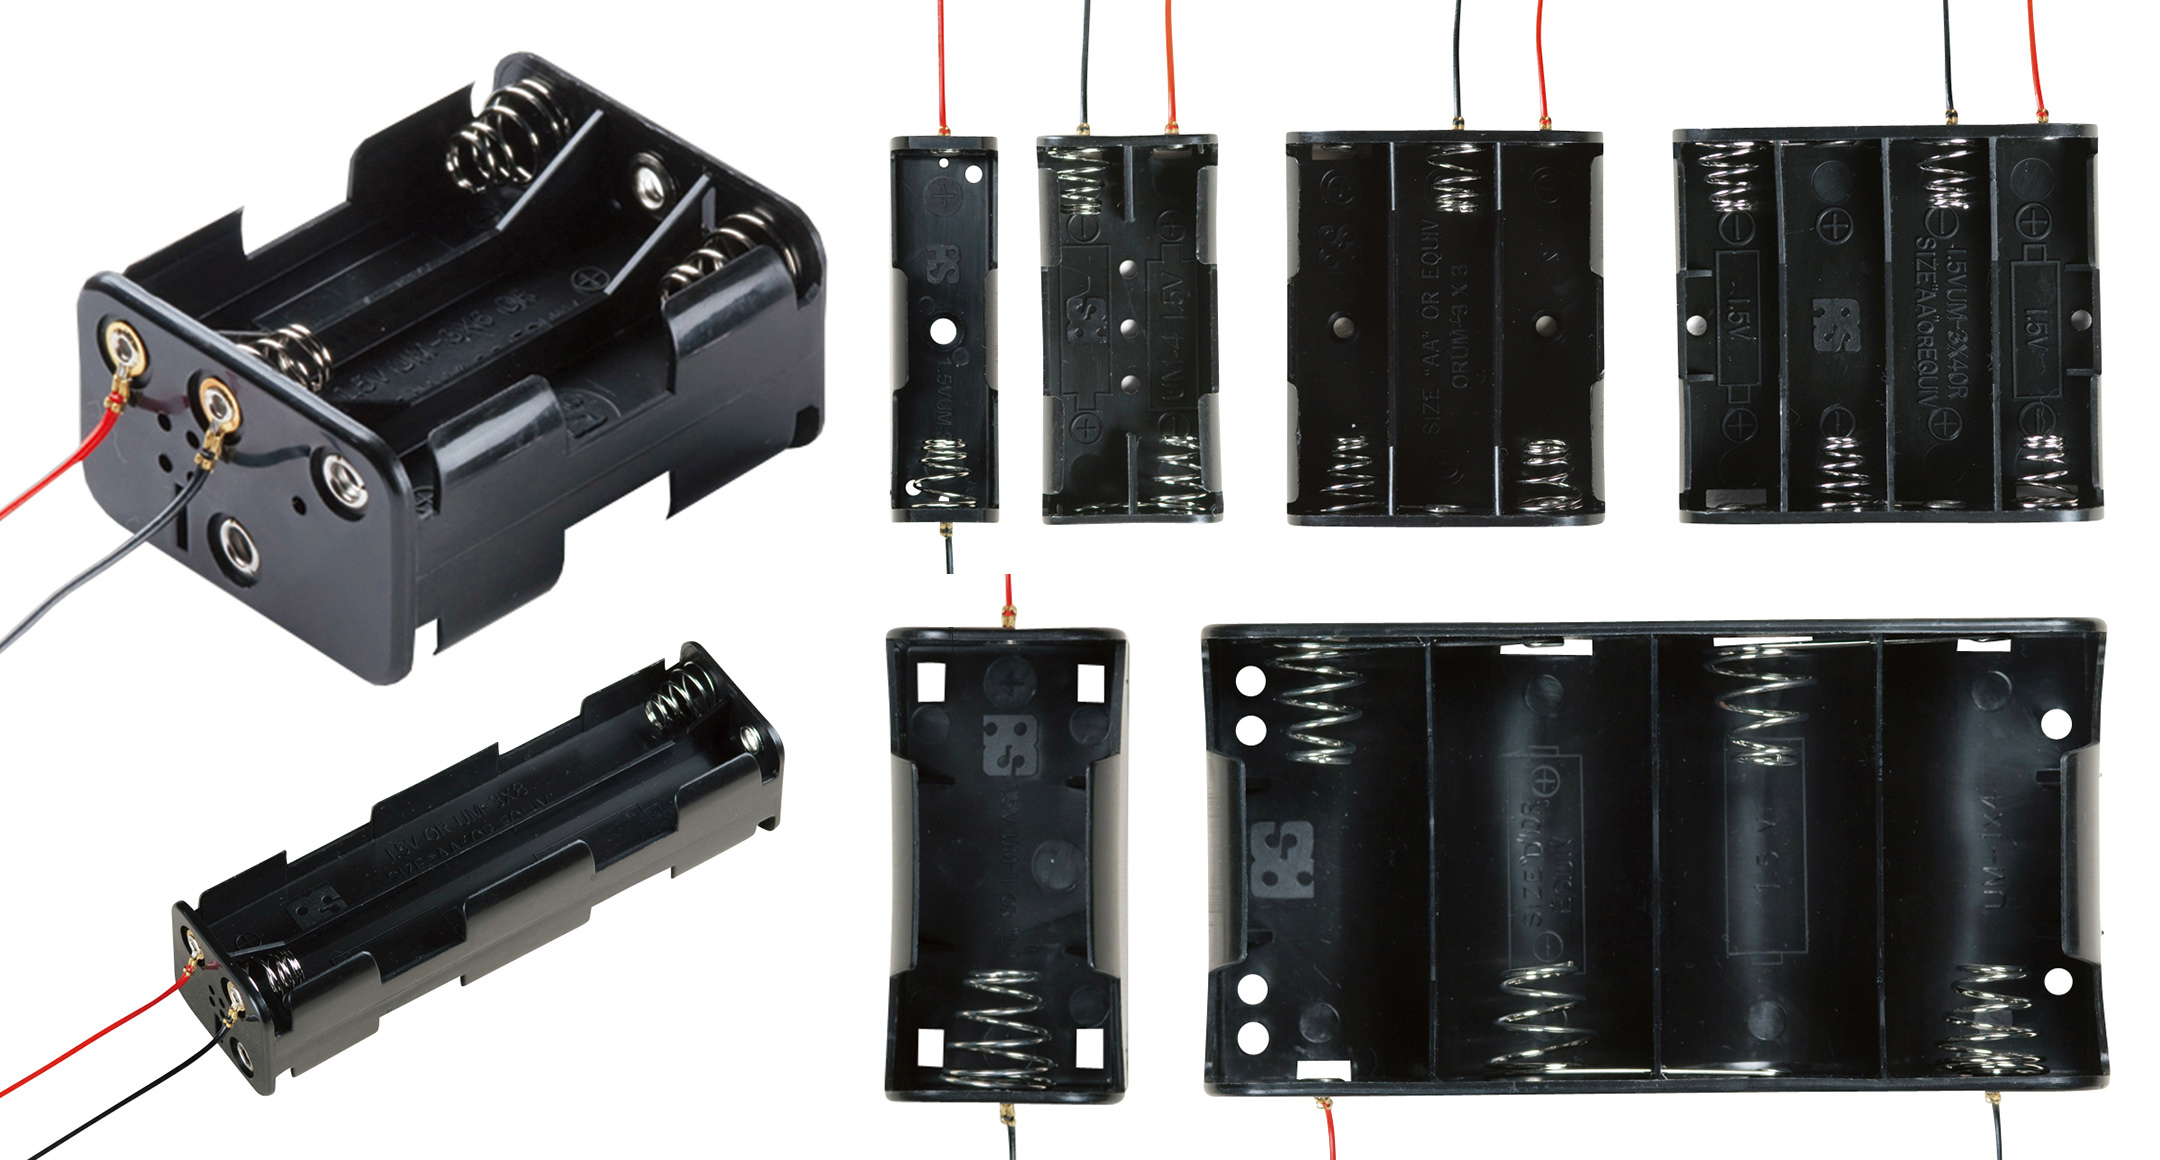 BATTERY HOLDER with LEAD WIRE - SN・MP・BH series